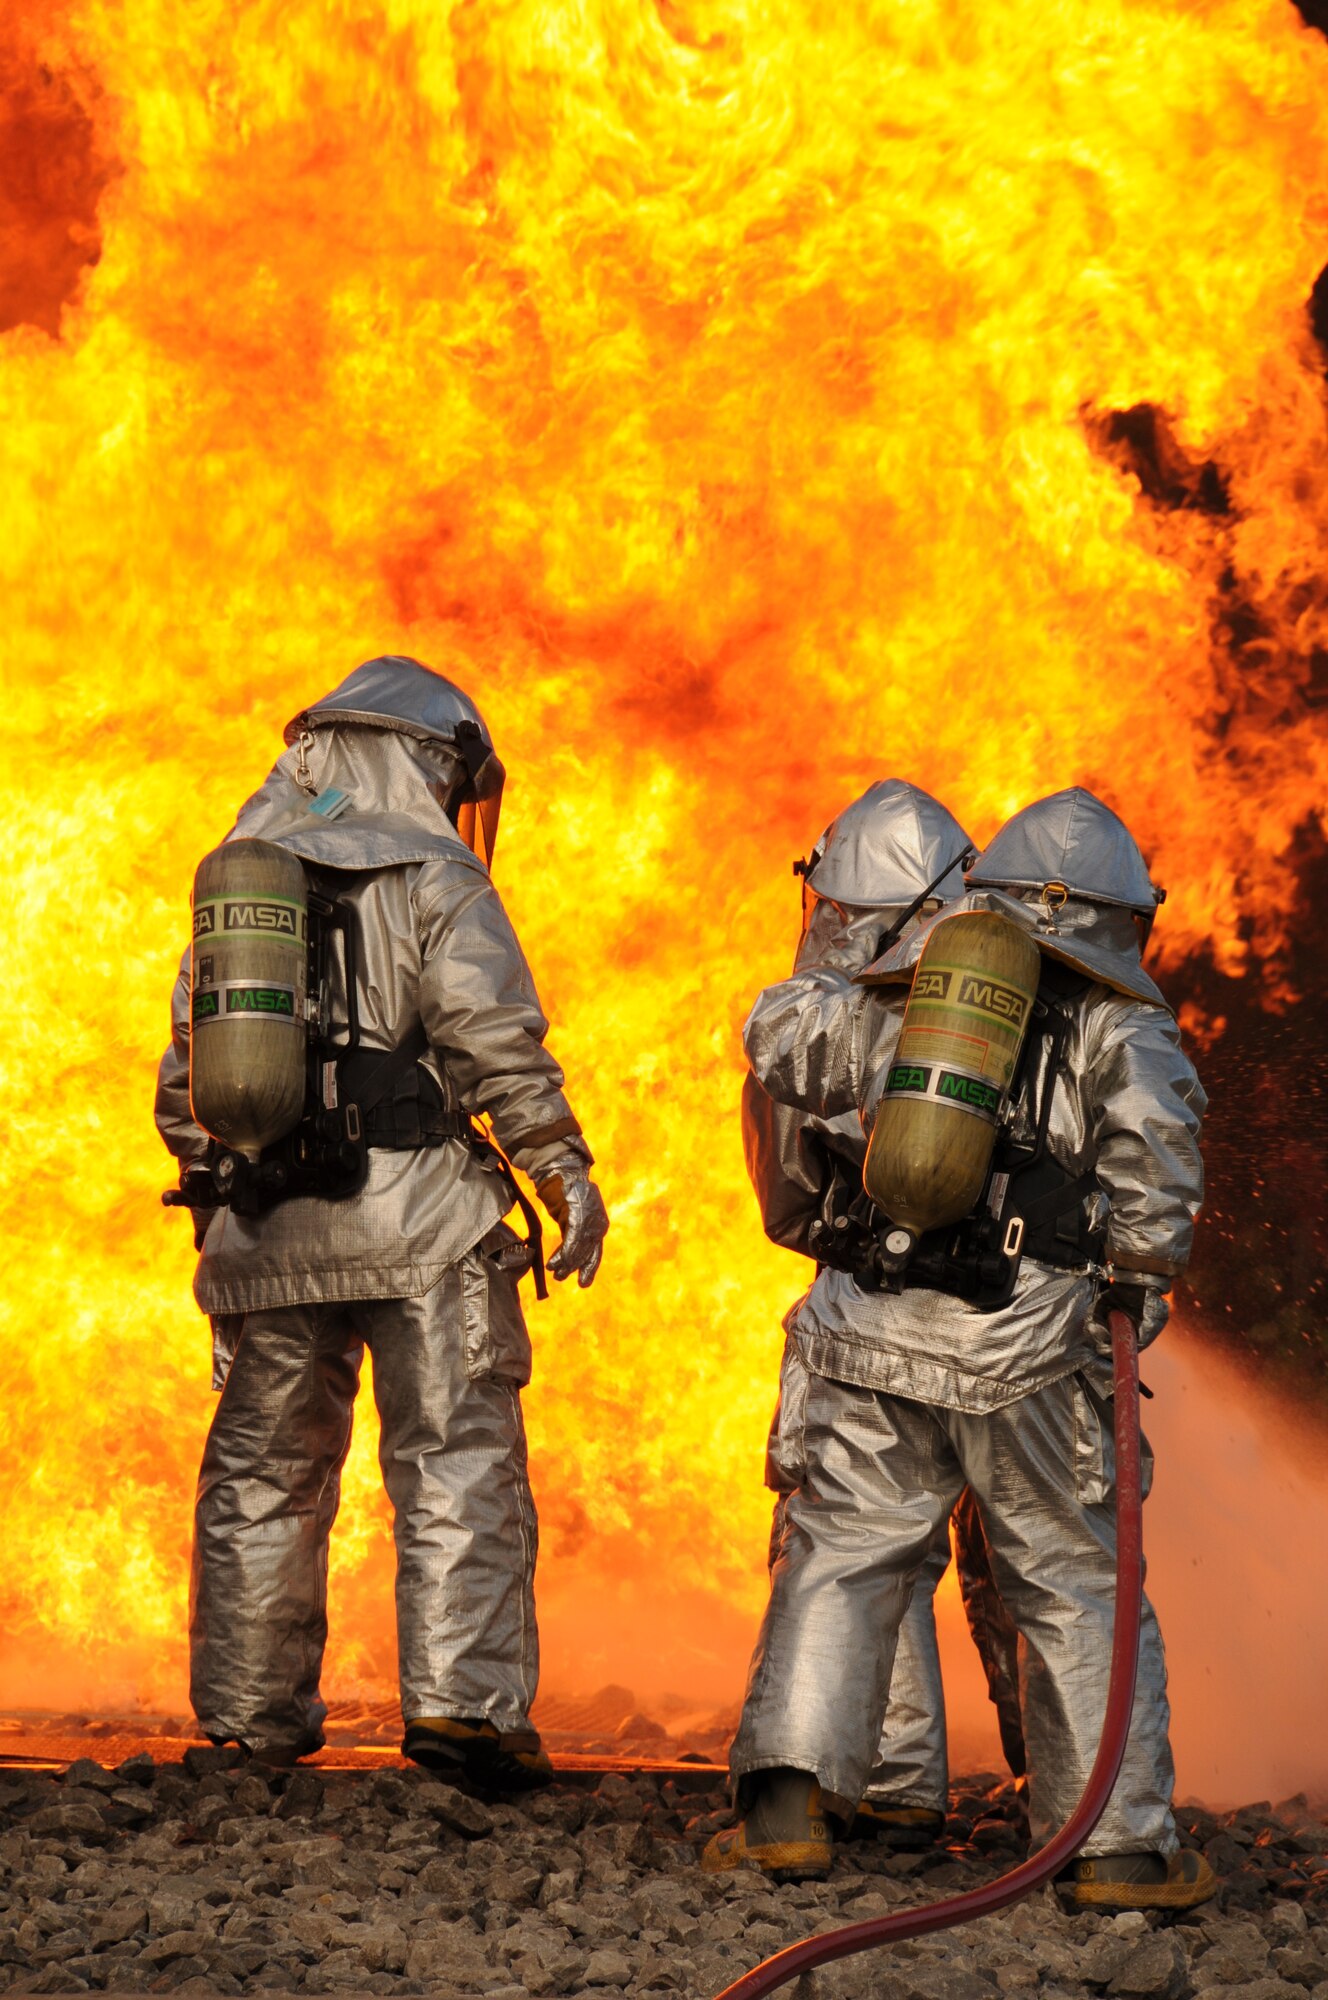 U.S. Air Force firefighters from the 180th Fighter Wing, extinguish an aircraft fire during a training exercise at the Phelps Collins Combat Readiness Training Center, Alpena, Michigan, October 16, 2010.  Firefighters from the 180 FW are doing annual training to prepare them for various rescue situations. (U.S. Air Force photo by Senior Airman Amber Williams/Released)